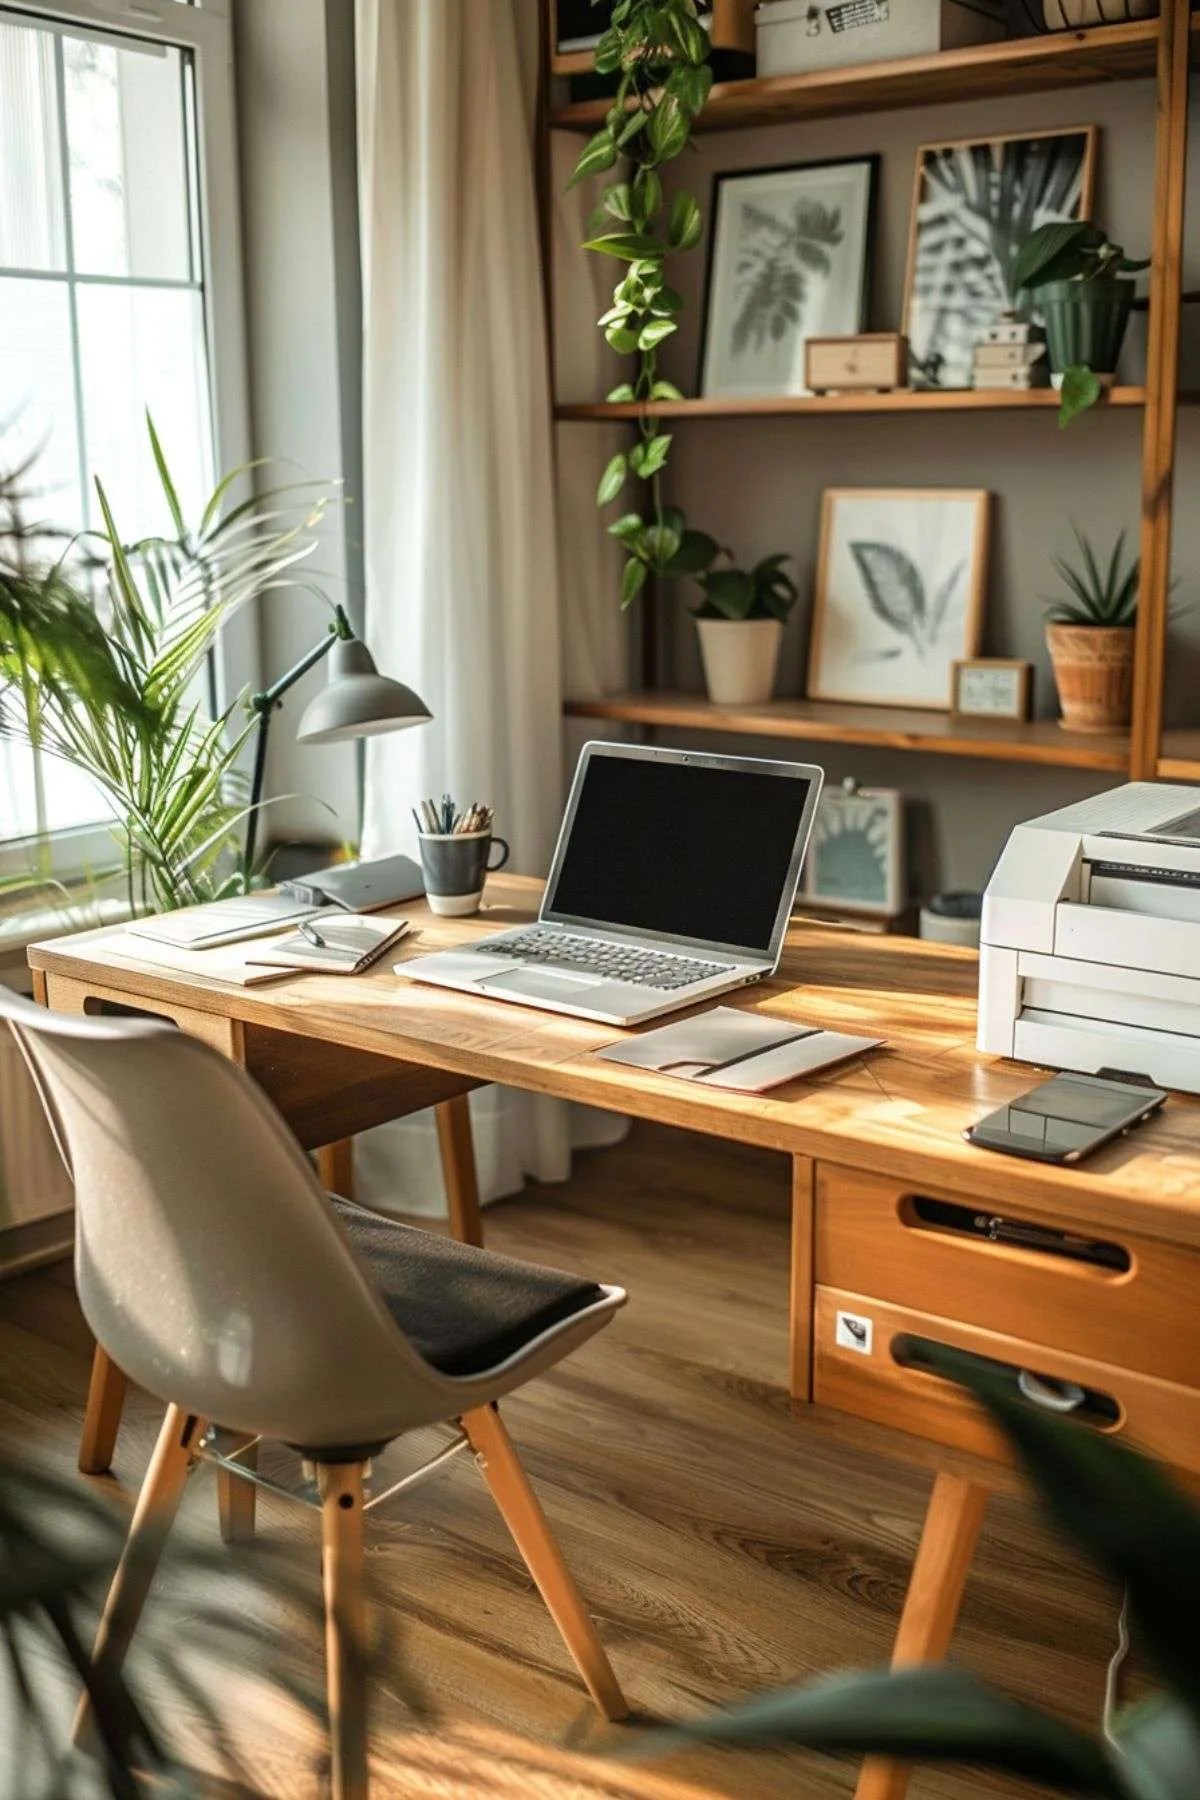 10 Home Office Decor Tips on How To Incorporate Smart Technology